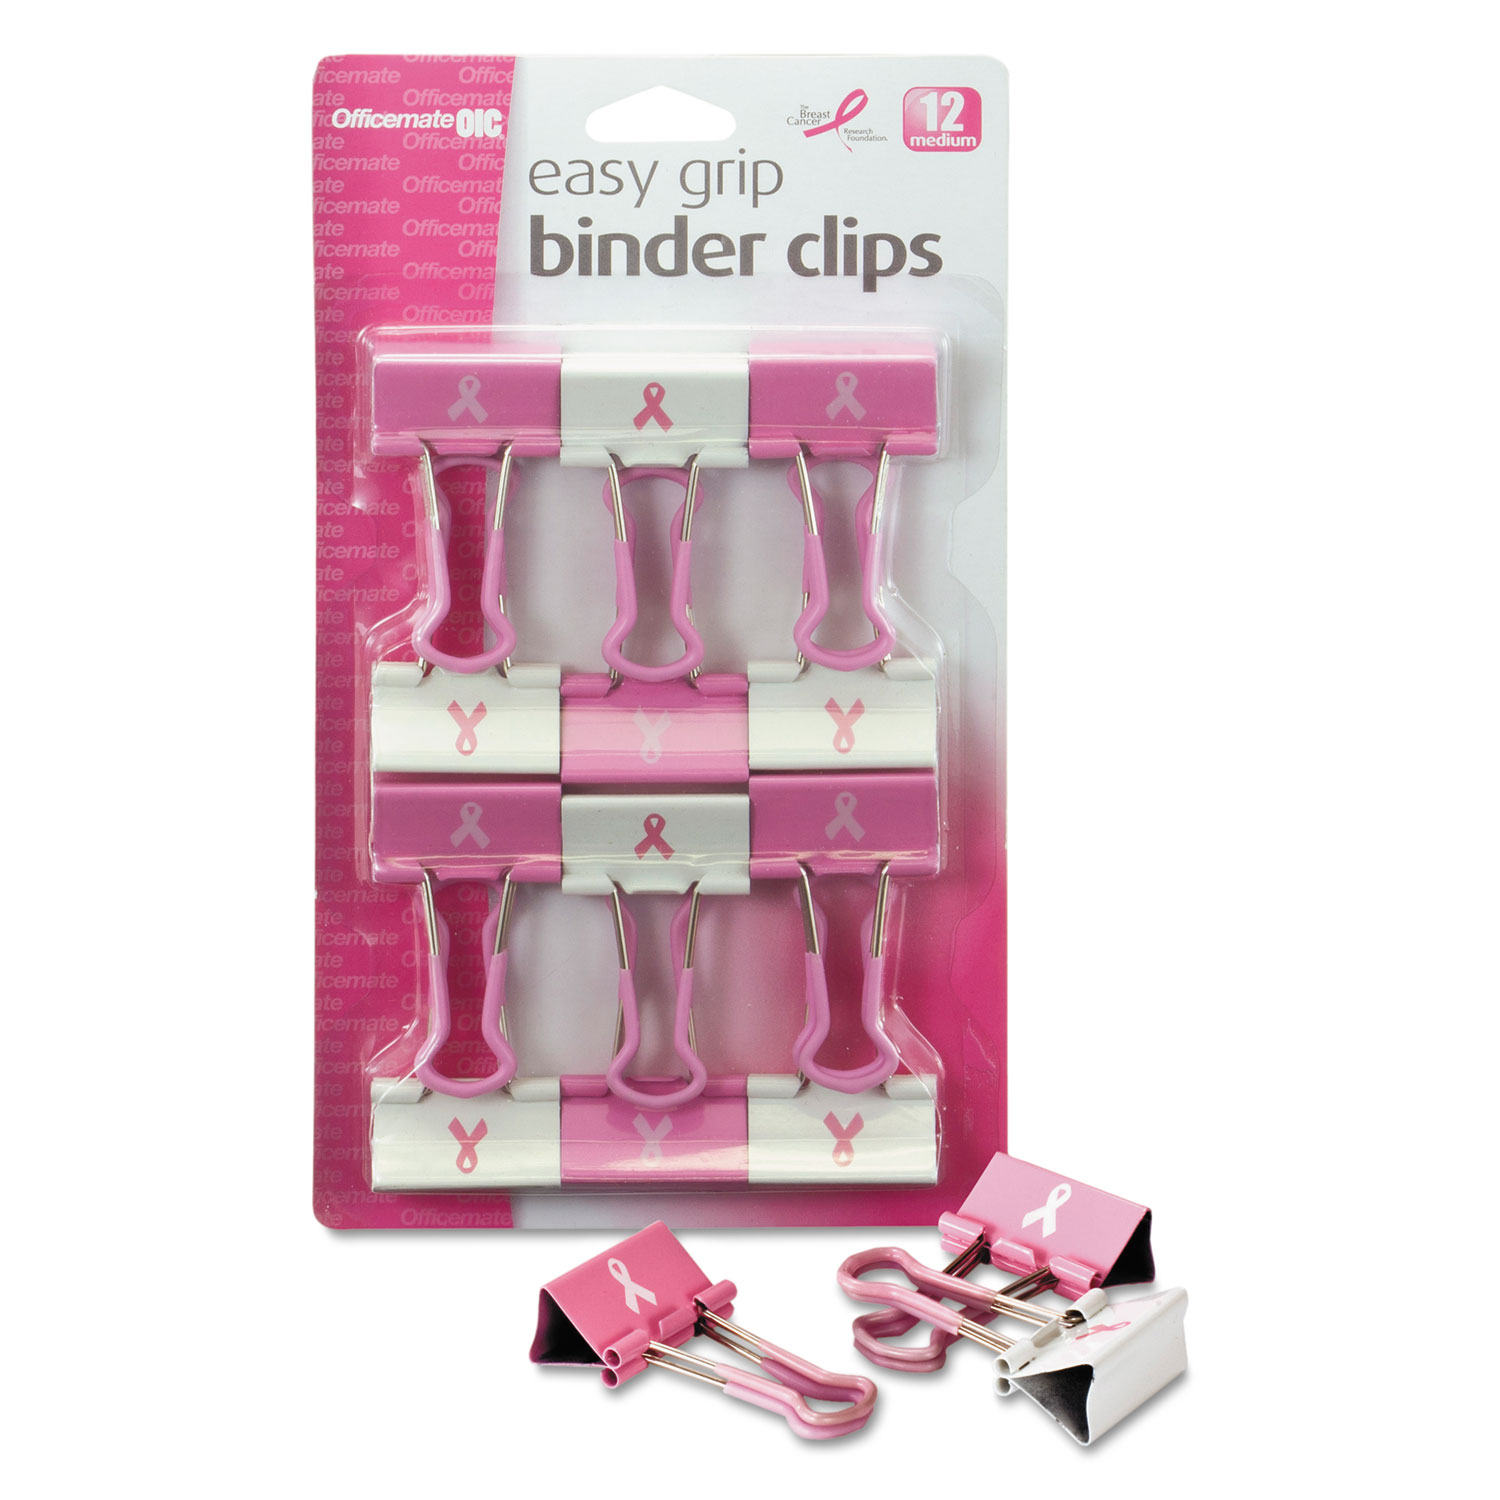  Officemate 08905 Easy Grip Pink Binder Clips, Medium, Pink/White, 12/Pack (OIC08905) 